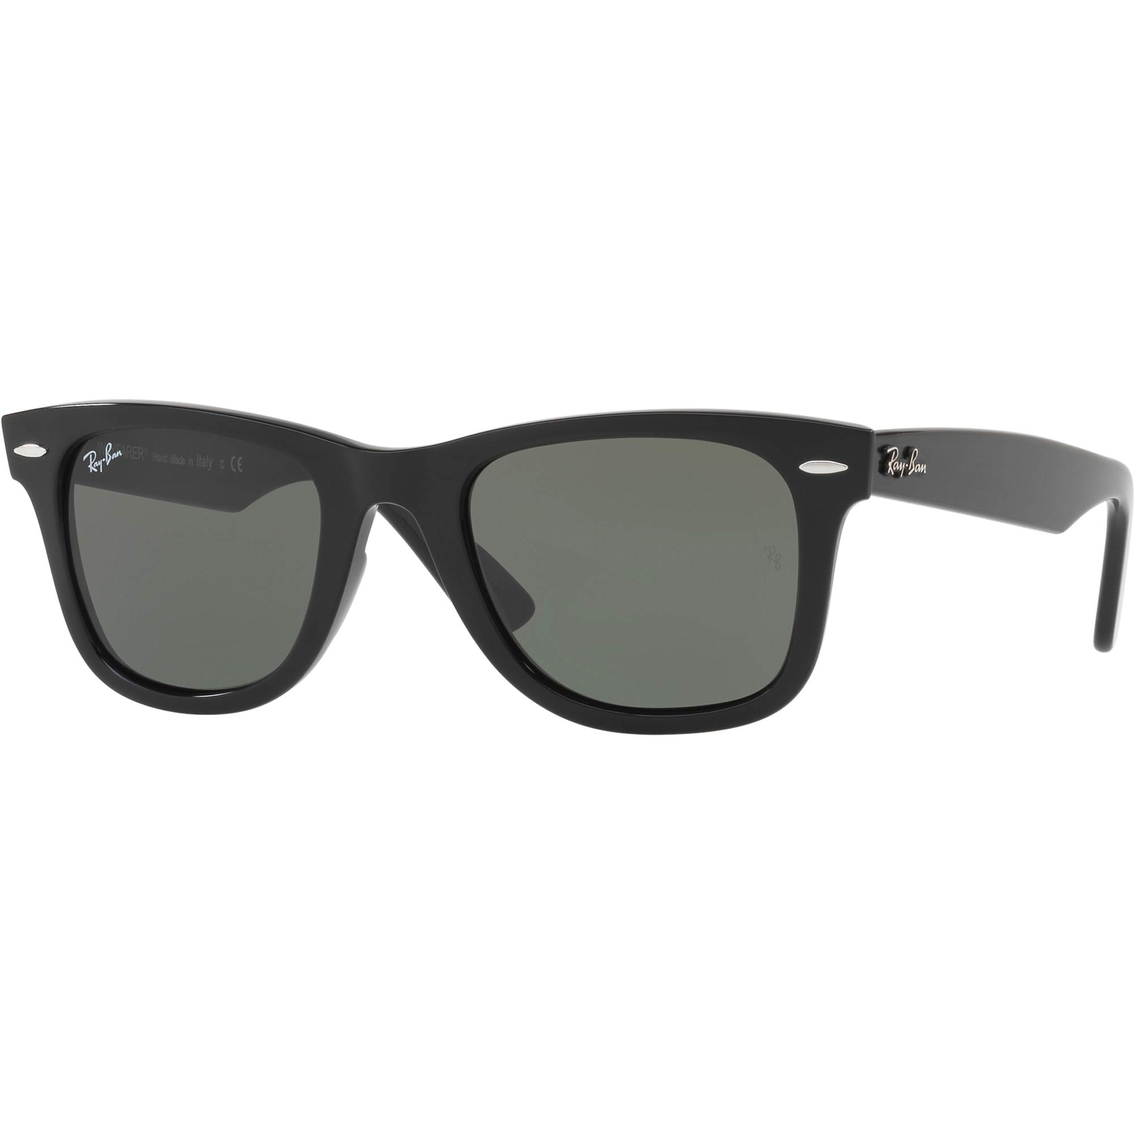 Ray-ban Injected Crystal Square Sunglasses 0rb4340 | Unisex Sunglasses ...